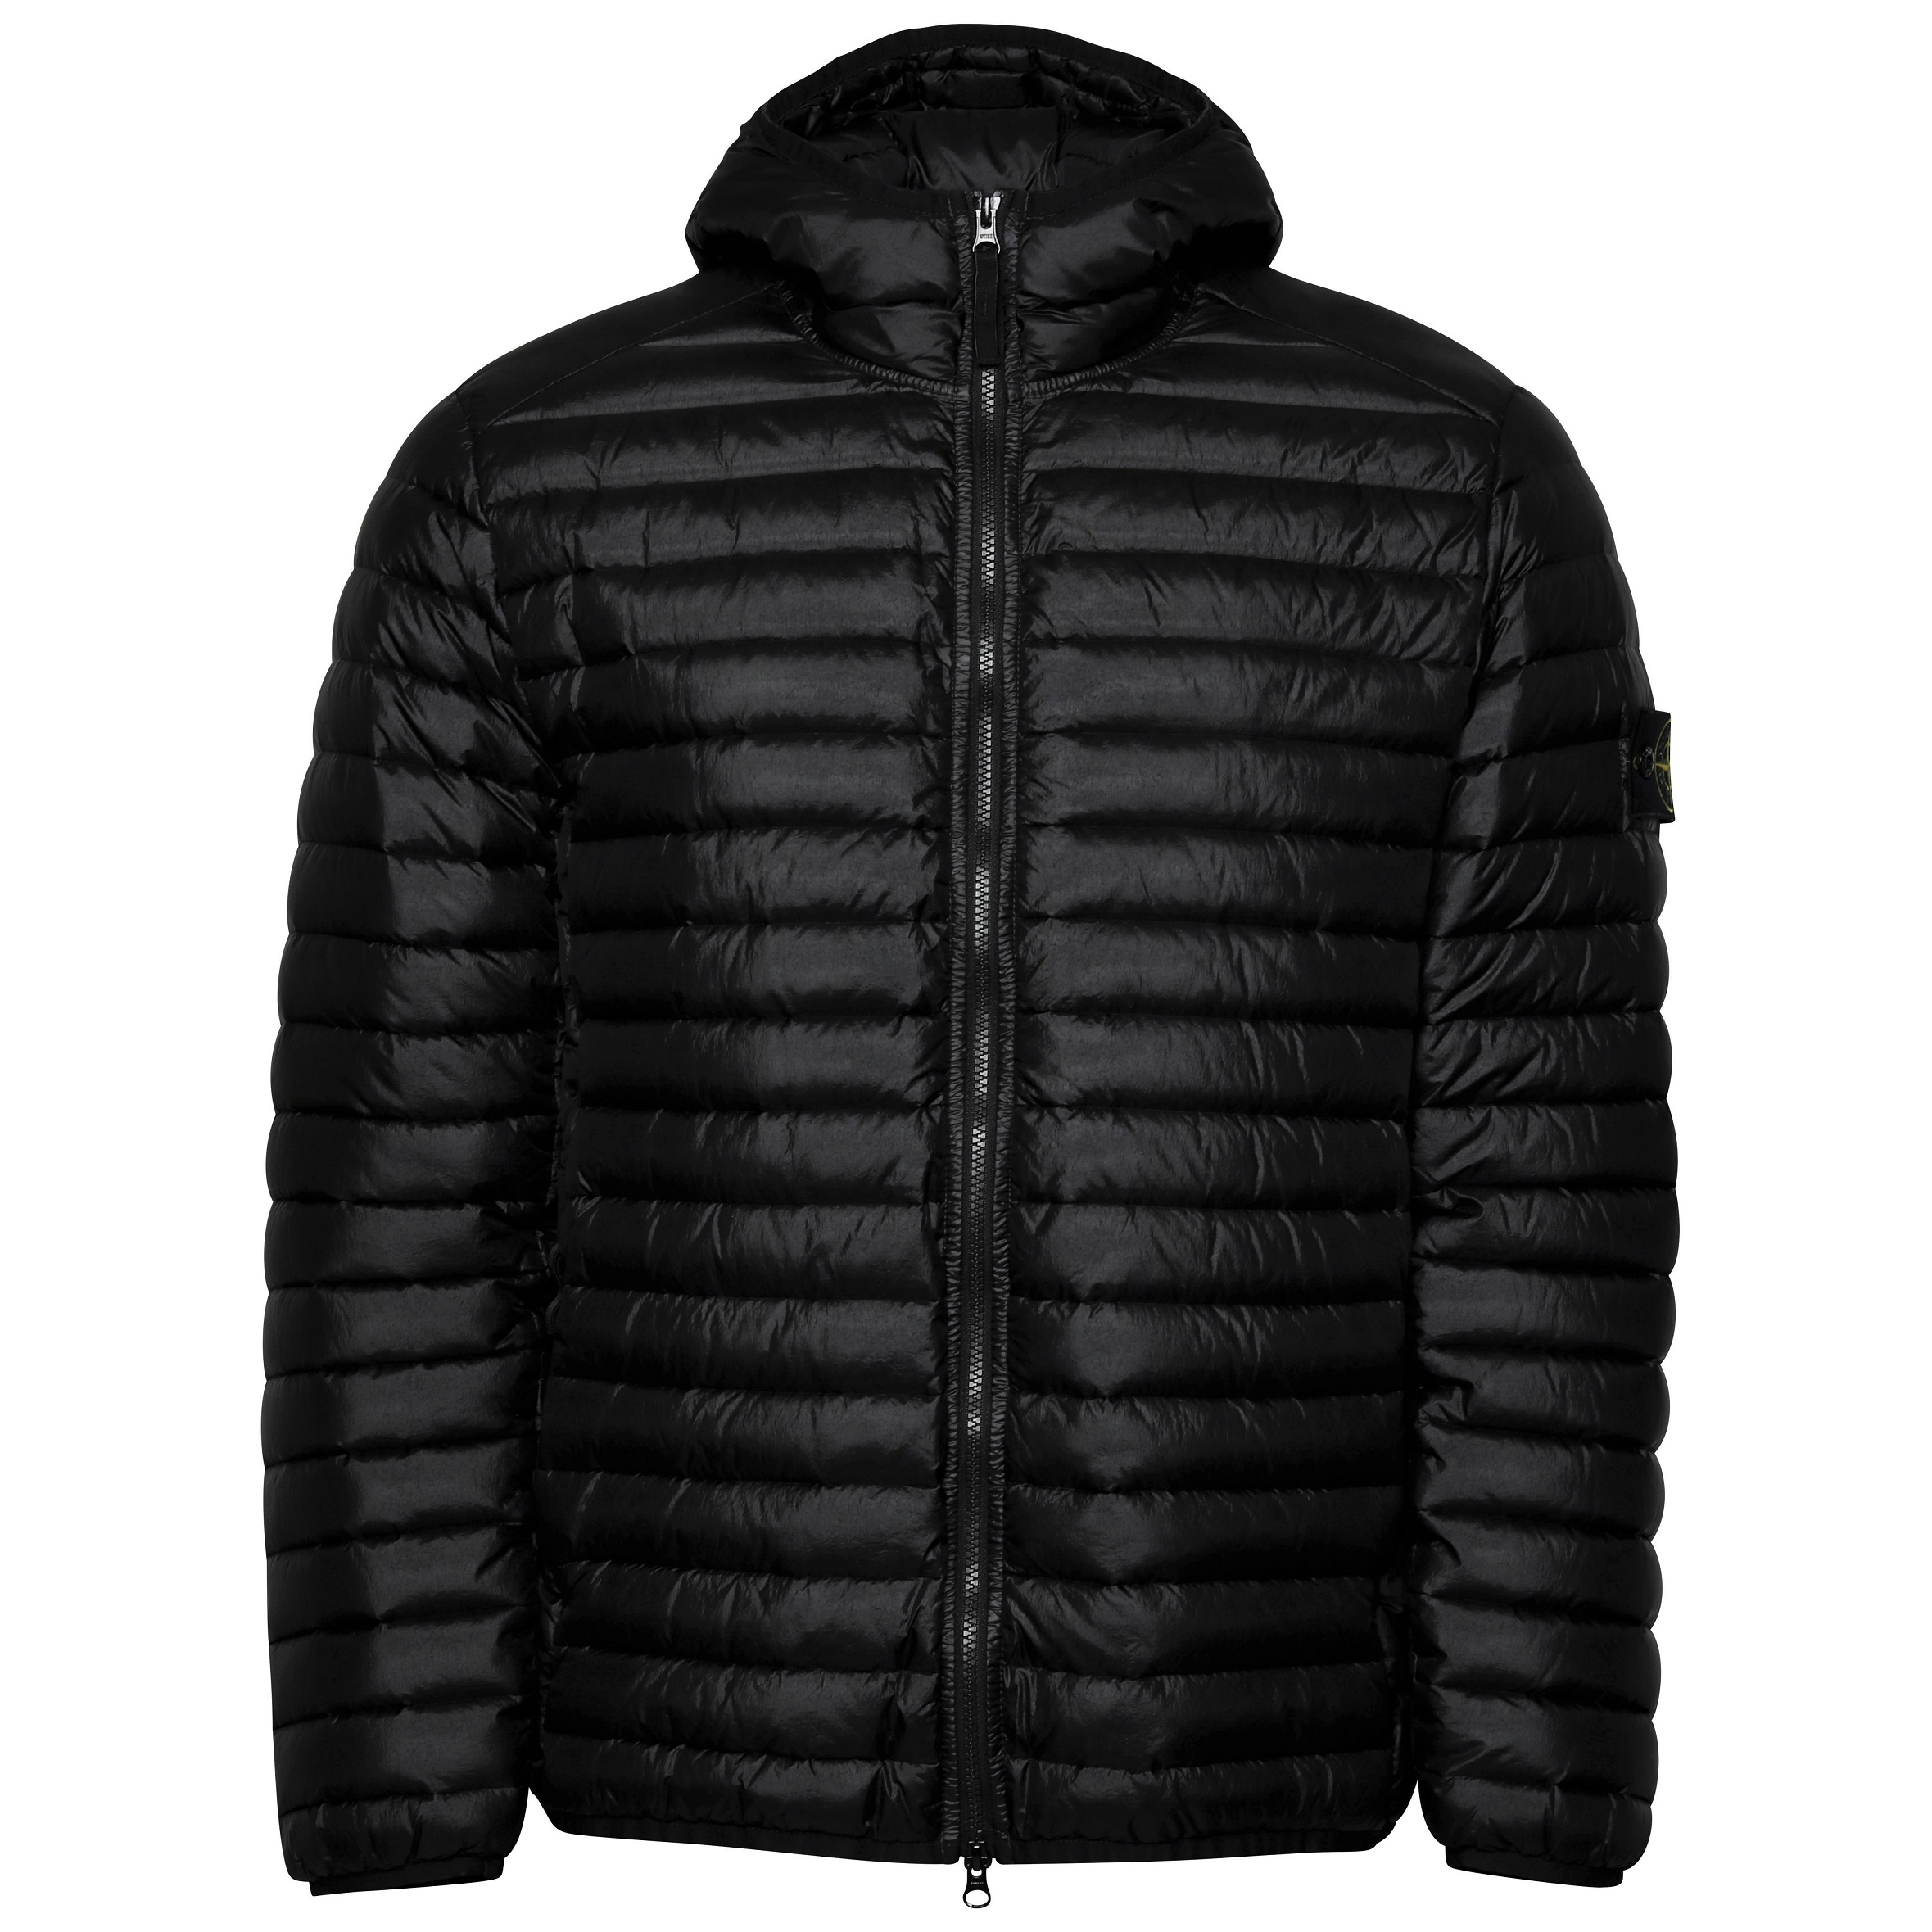 Stone Island Hooded Real Down Jacket in Black 2XL